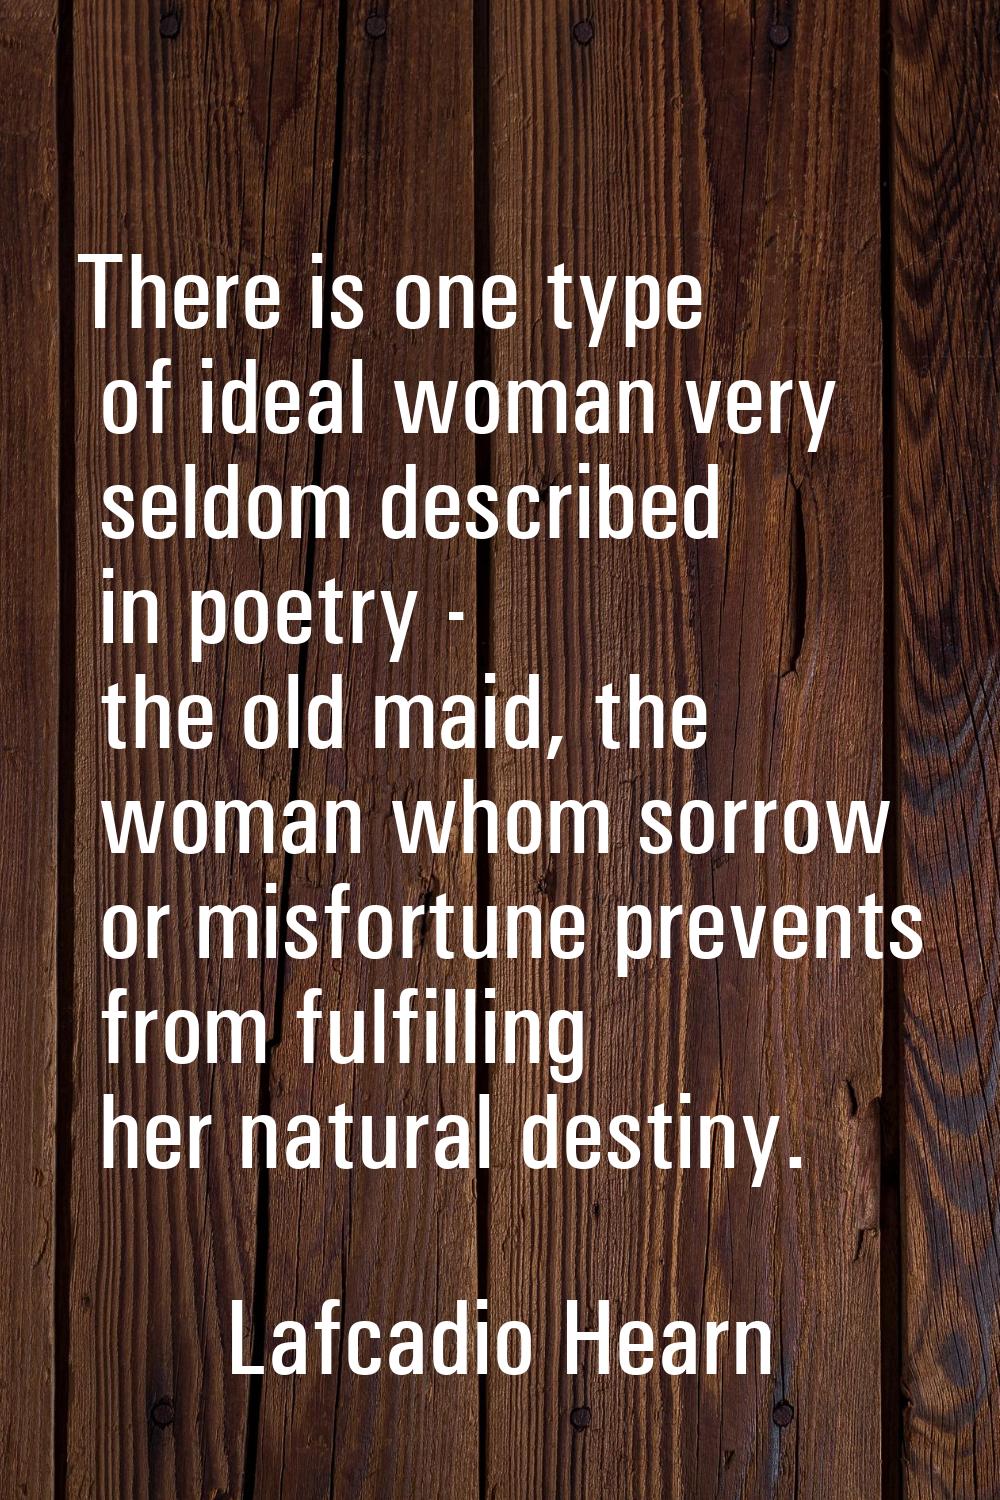 There is one type of ideal woman very seldom described in poetry - the old maid, the woman whom sor